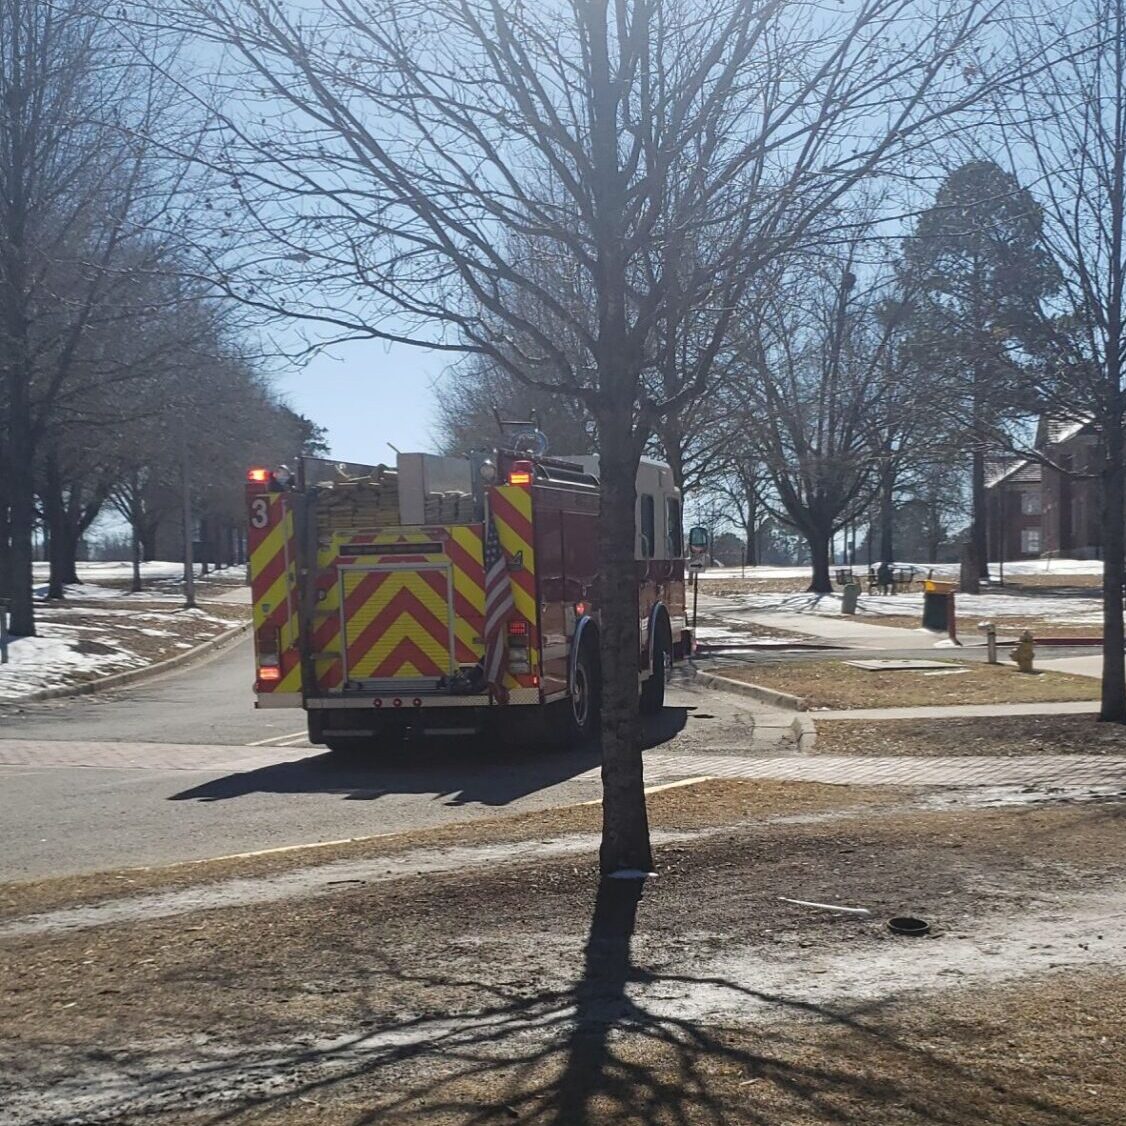 Fire Truck by Nutt Hall